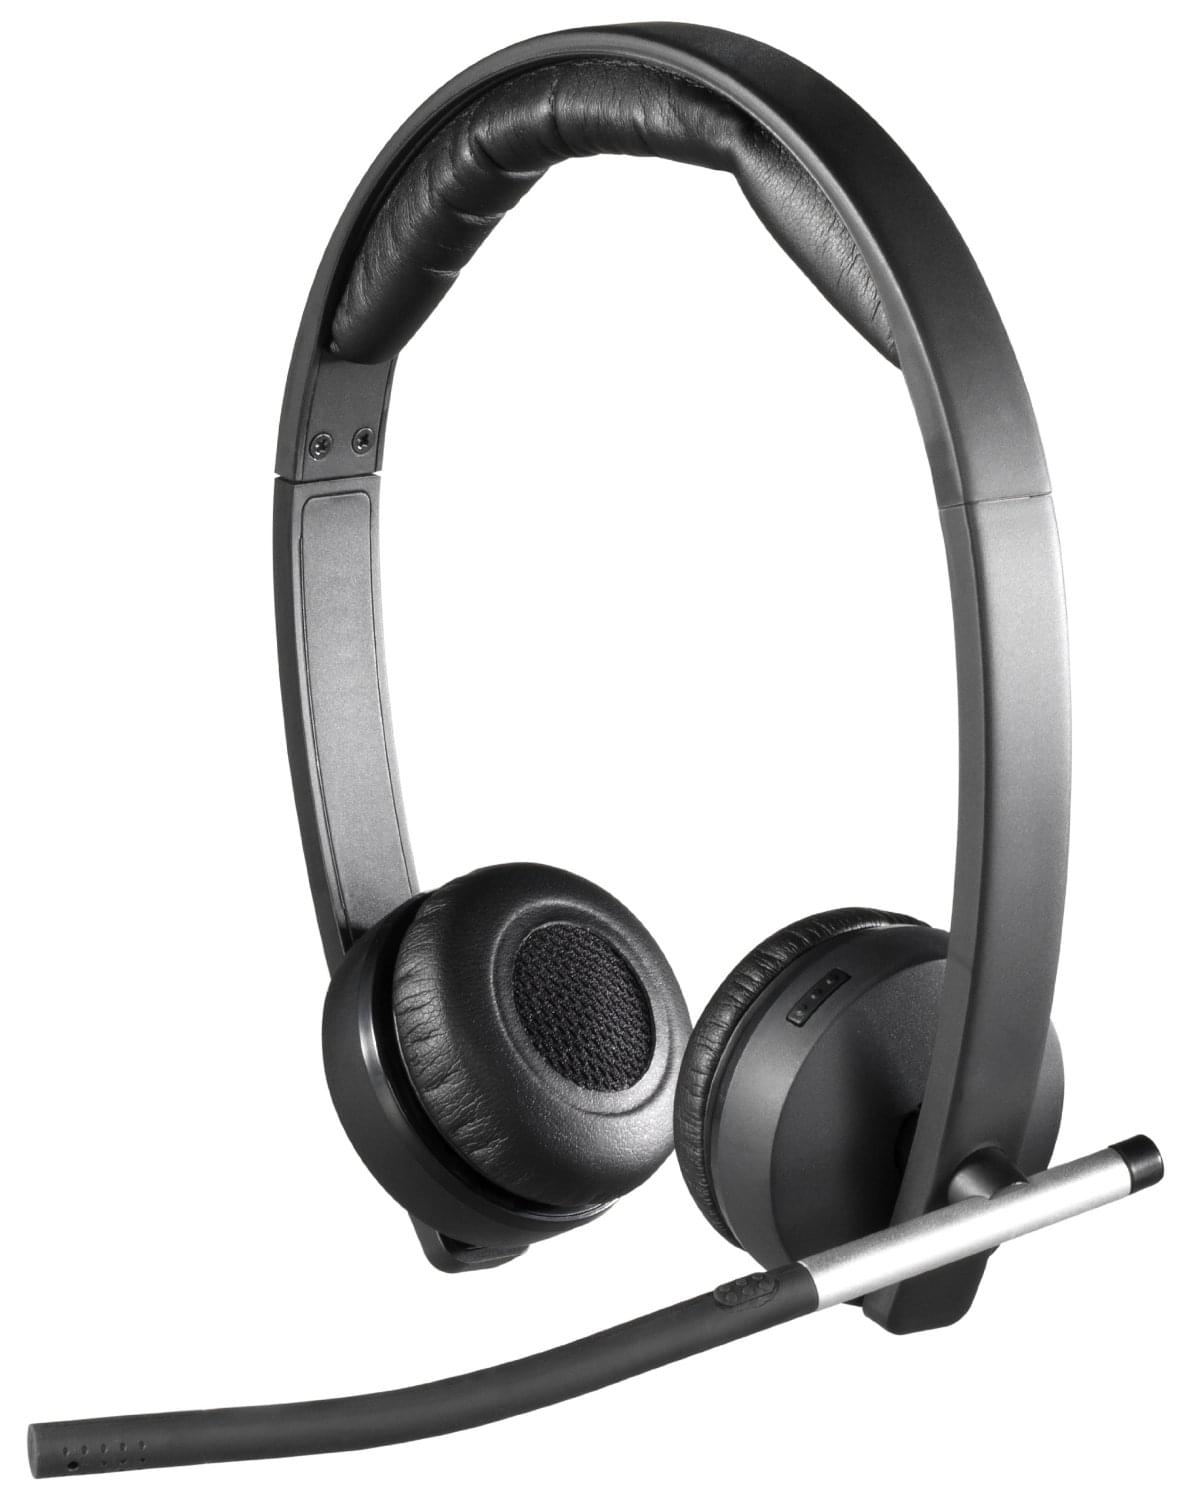 wireless headsets skype for business mac